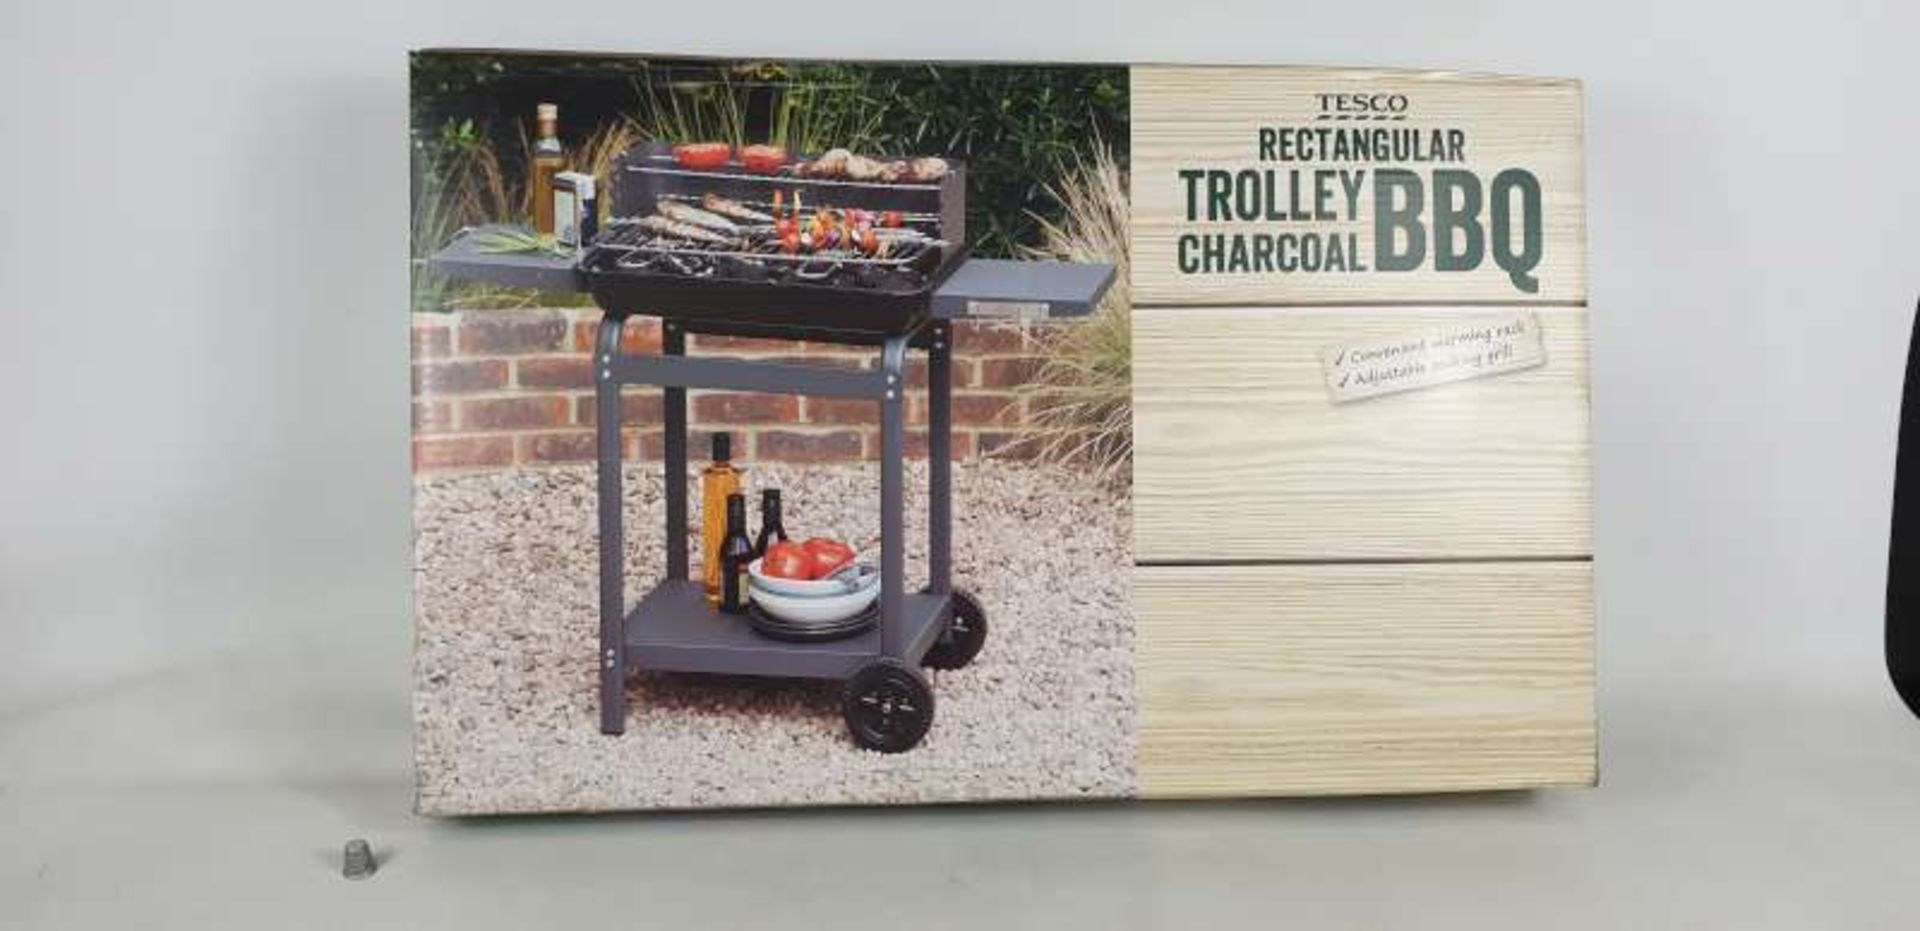 6 X BRAND NEW BOXED RECTANGULAR TROLLEY CHARCOAL BBQ